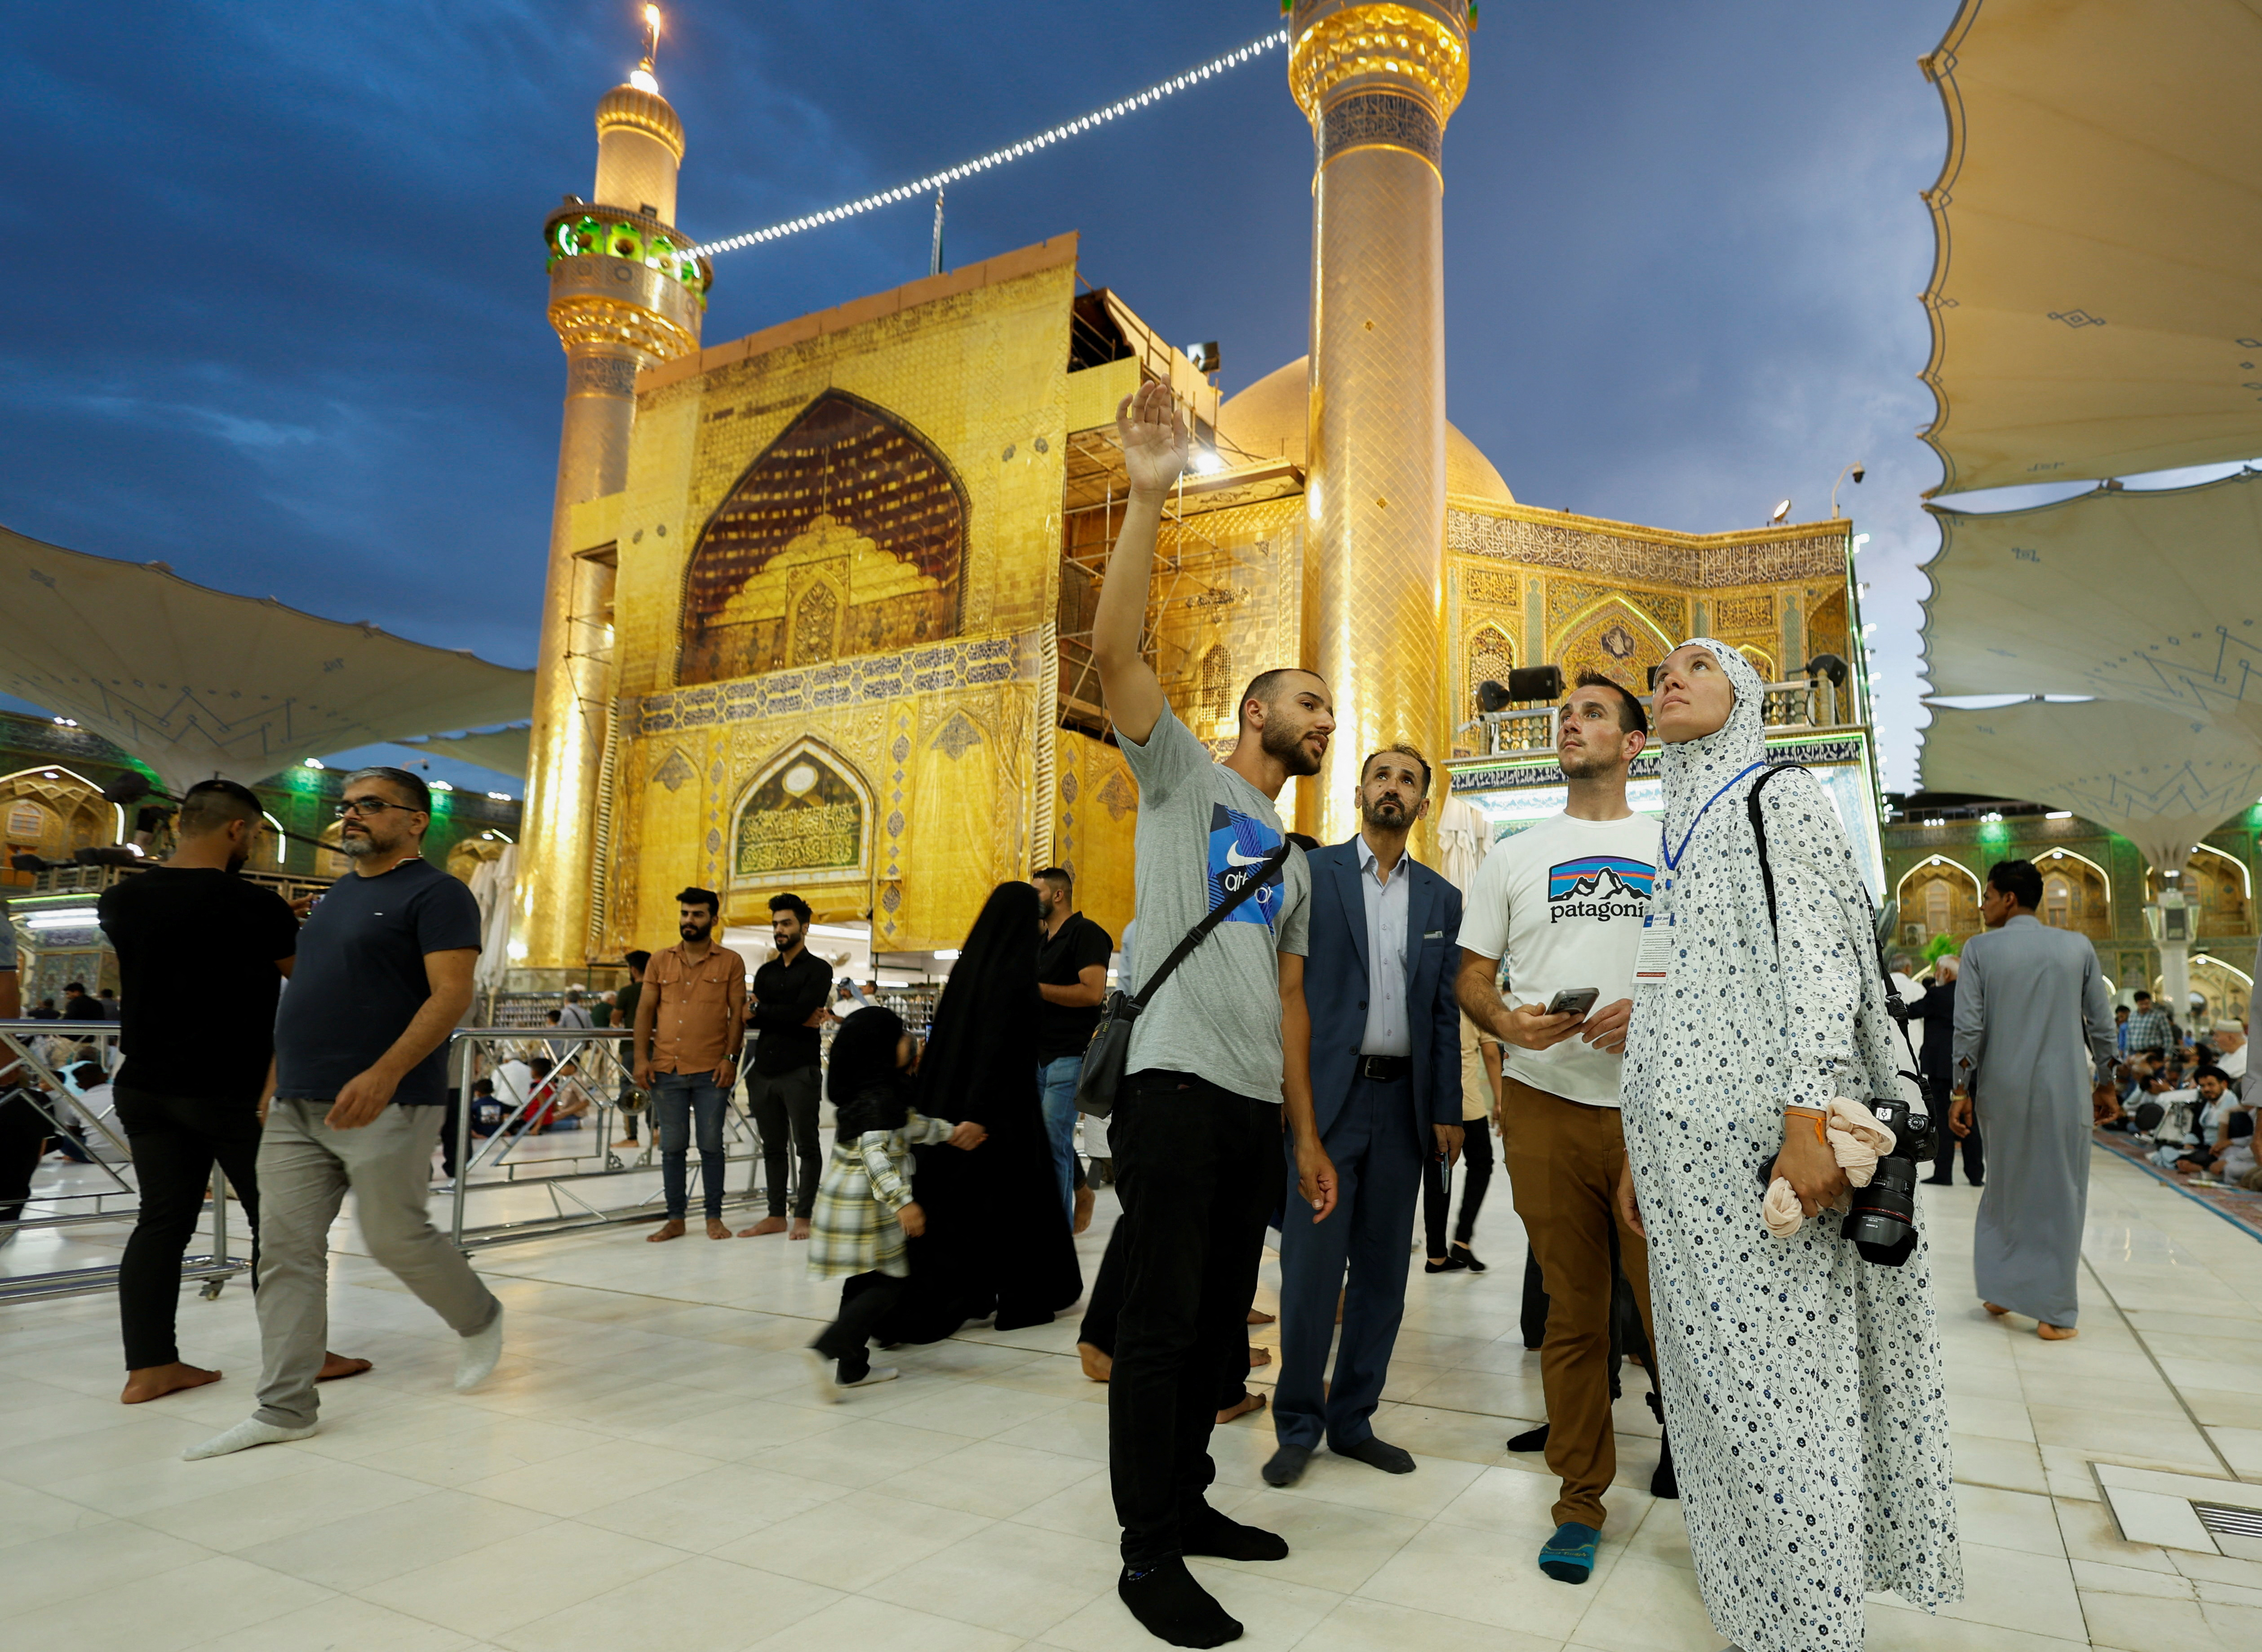 Anna Nikolaevna, 38, a Russian national, and Jacob Nemec, 29, an American national, during a tour at Imam Ali shrine, in the holy city of Najaf